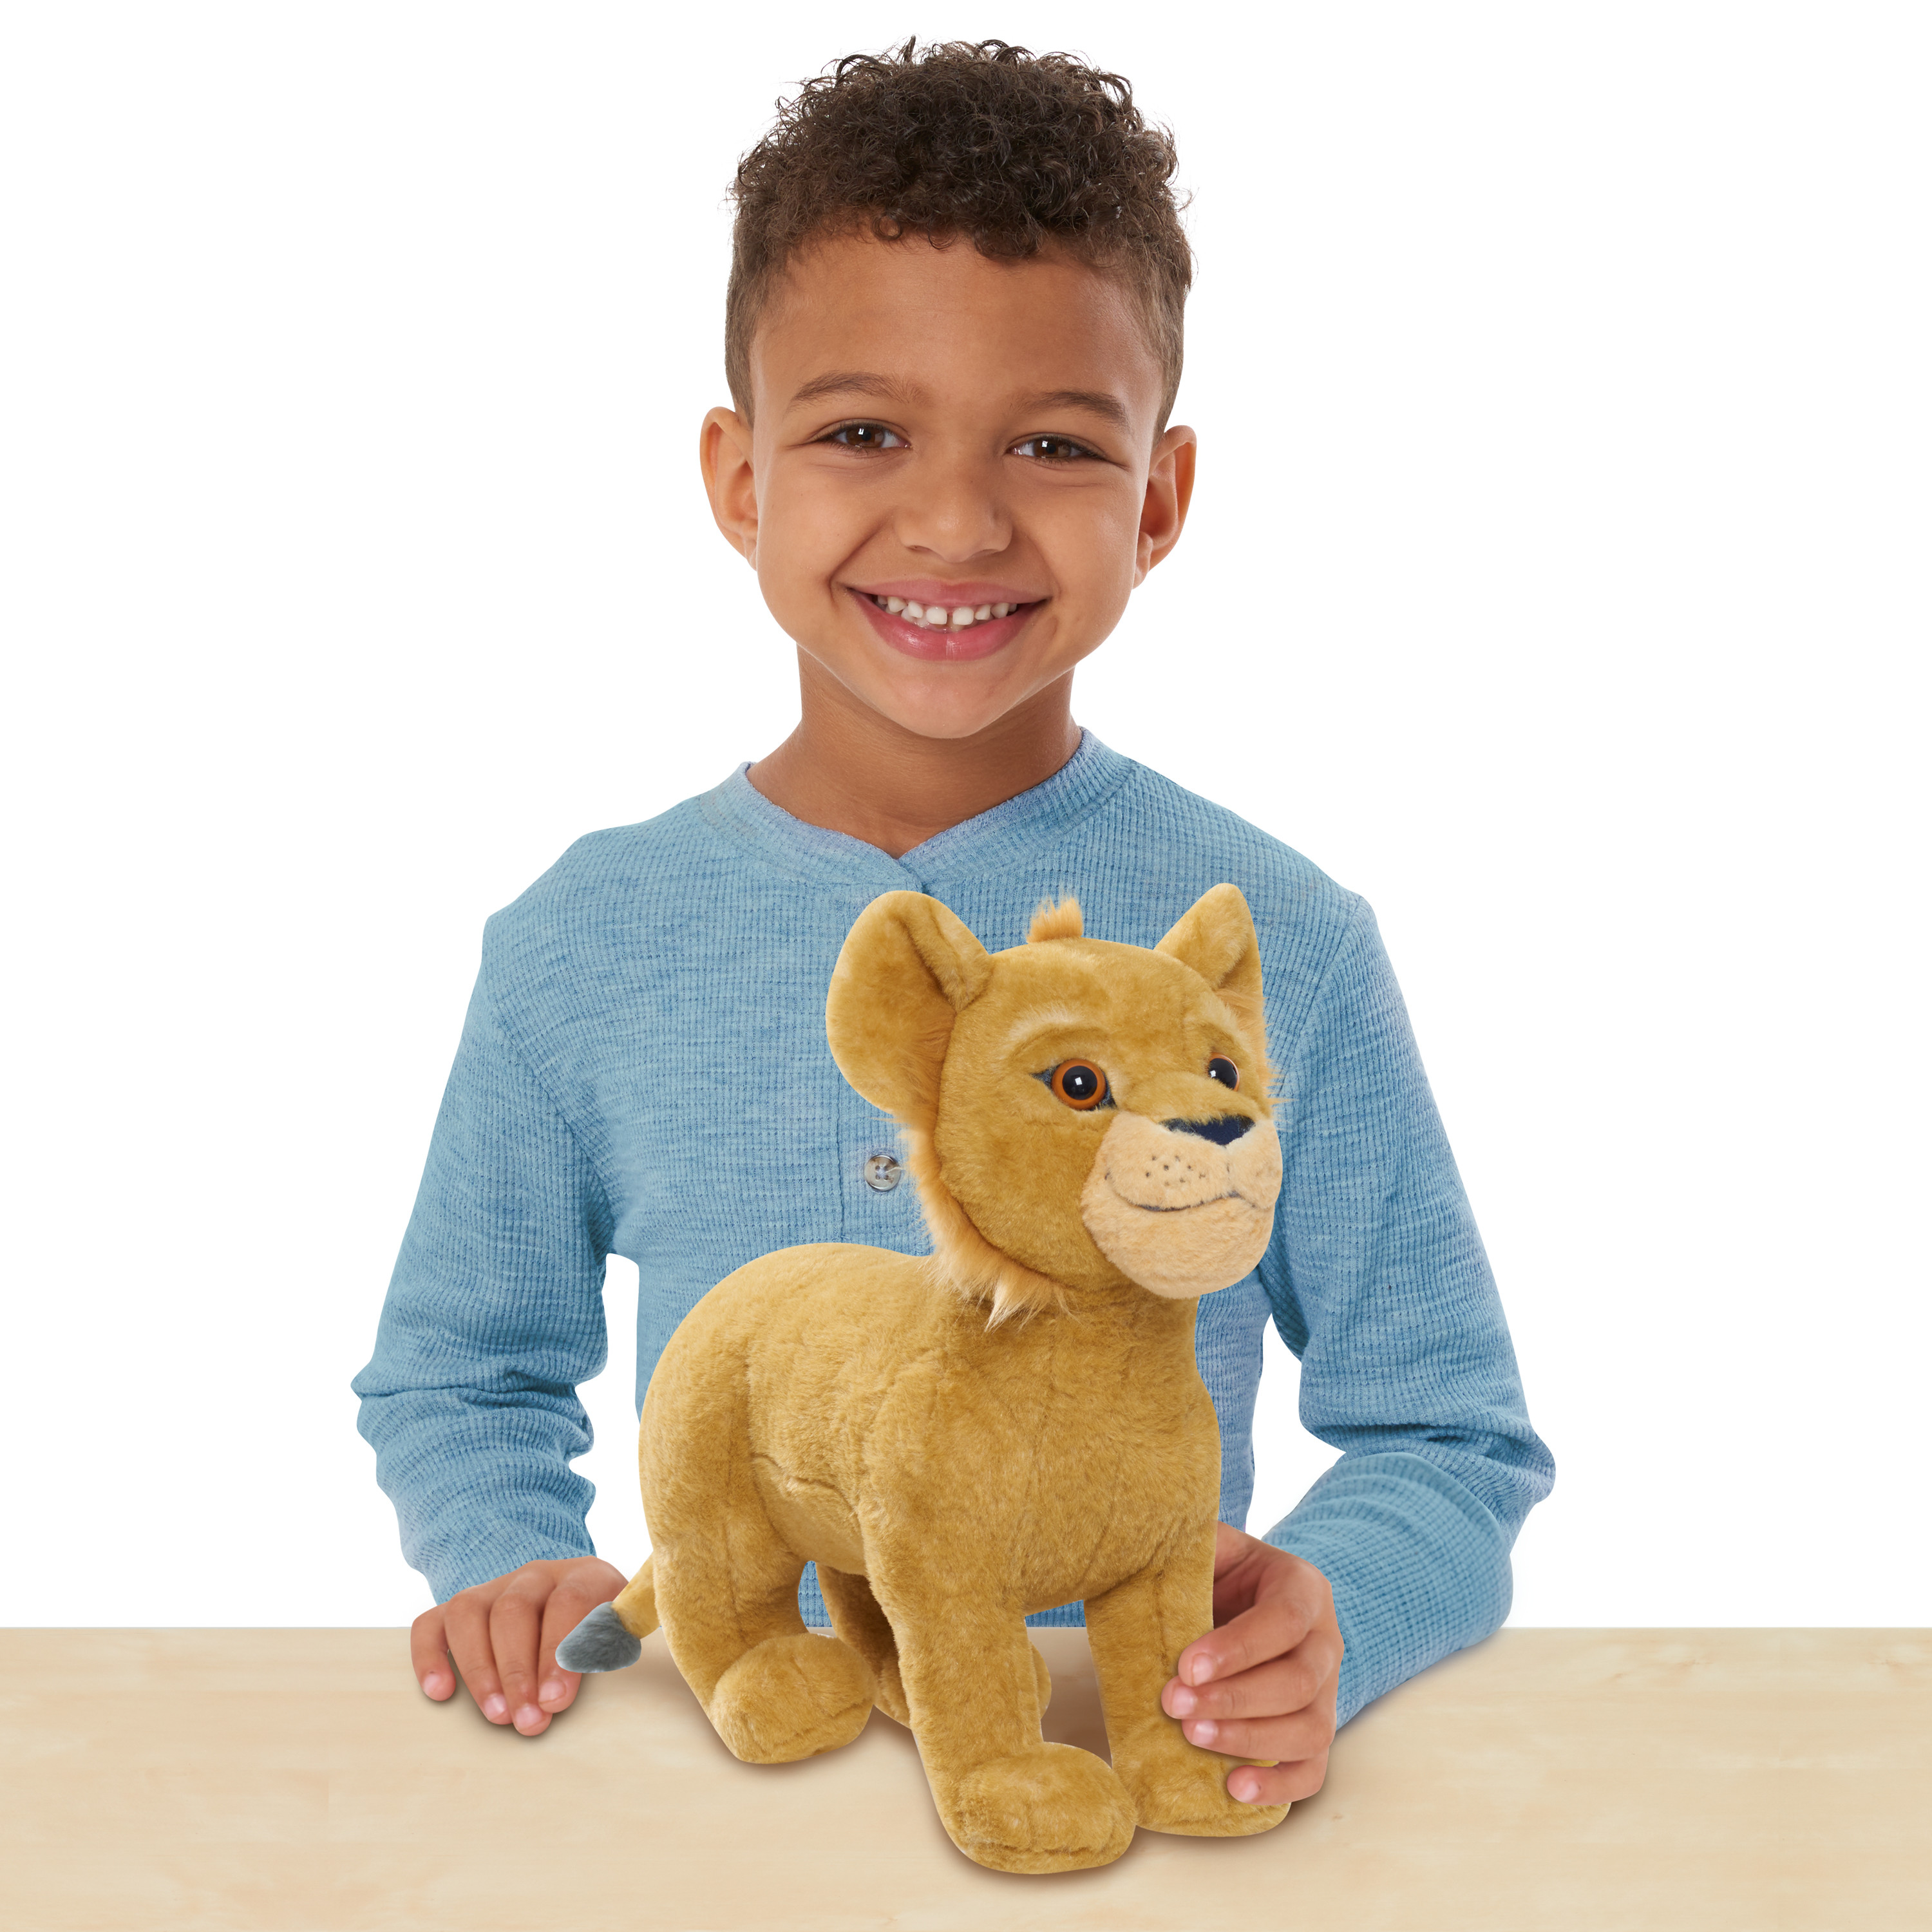 Disney's The Lion King Large Plush Simba, Stuffed Animal, Lion, Officially Licensed Kids Toys for Ages 3 Up, Gifts and Presents - image 2 of 4